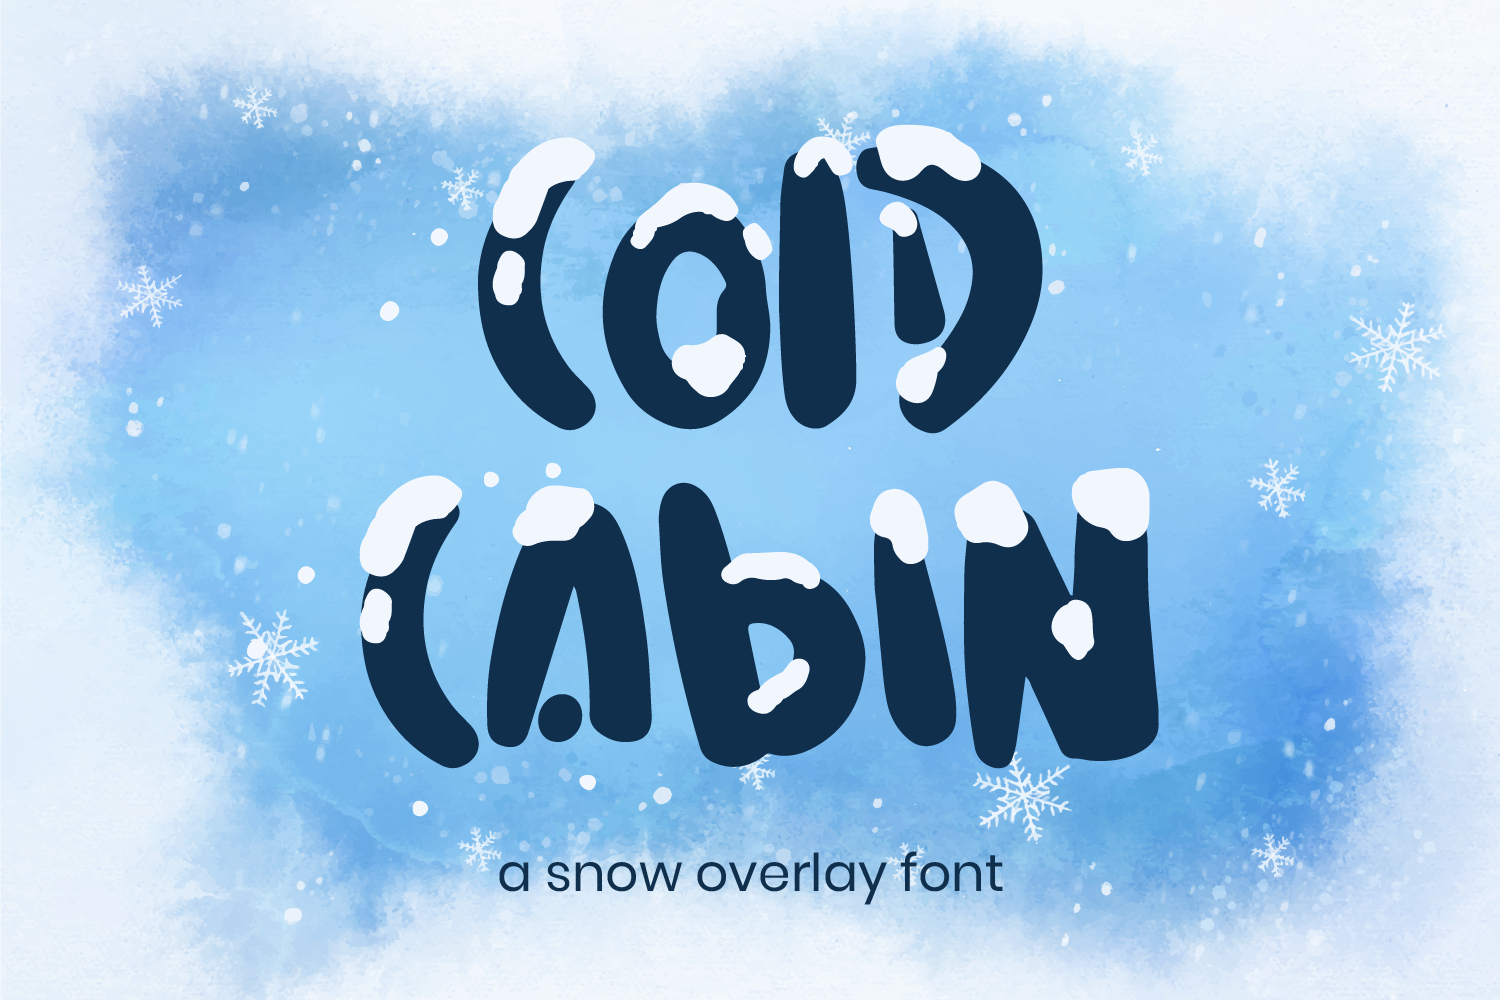 Cold Cabin Free Font